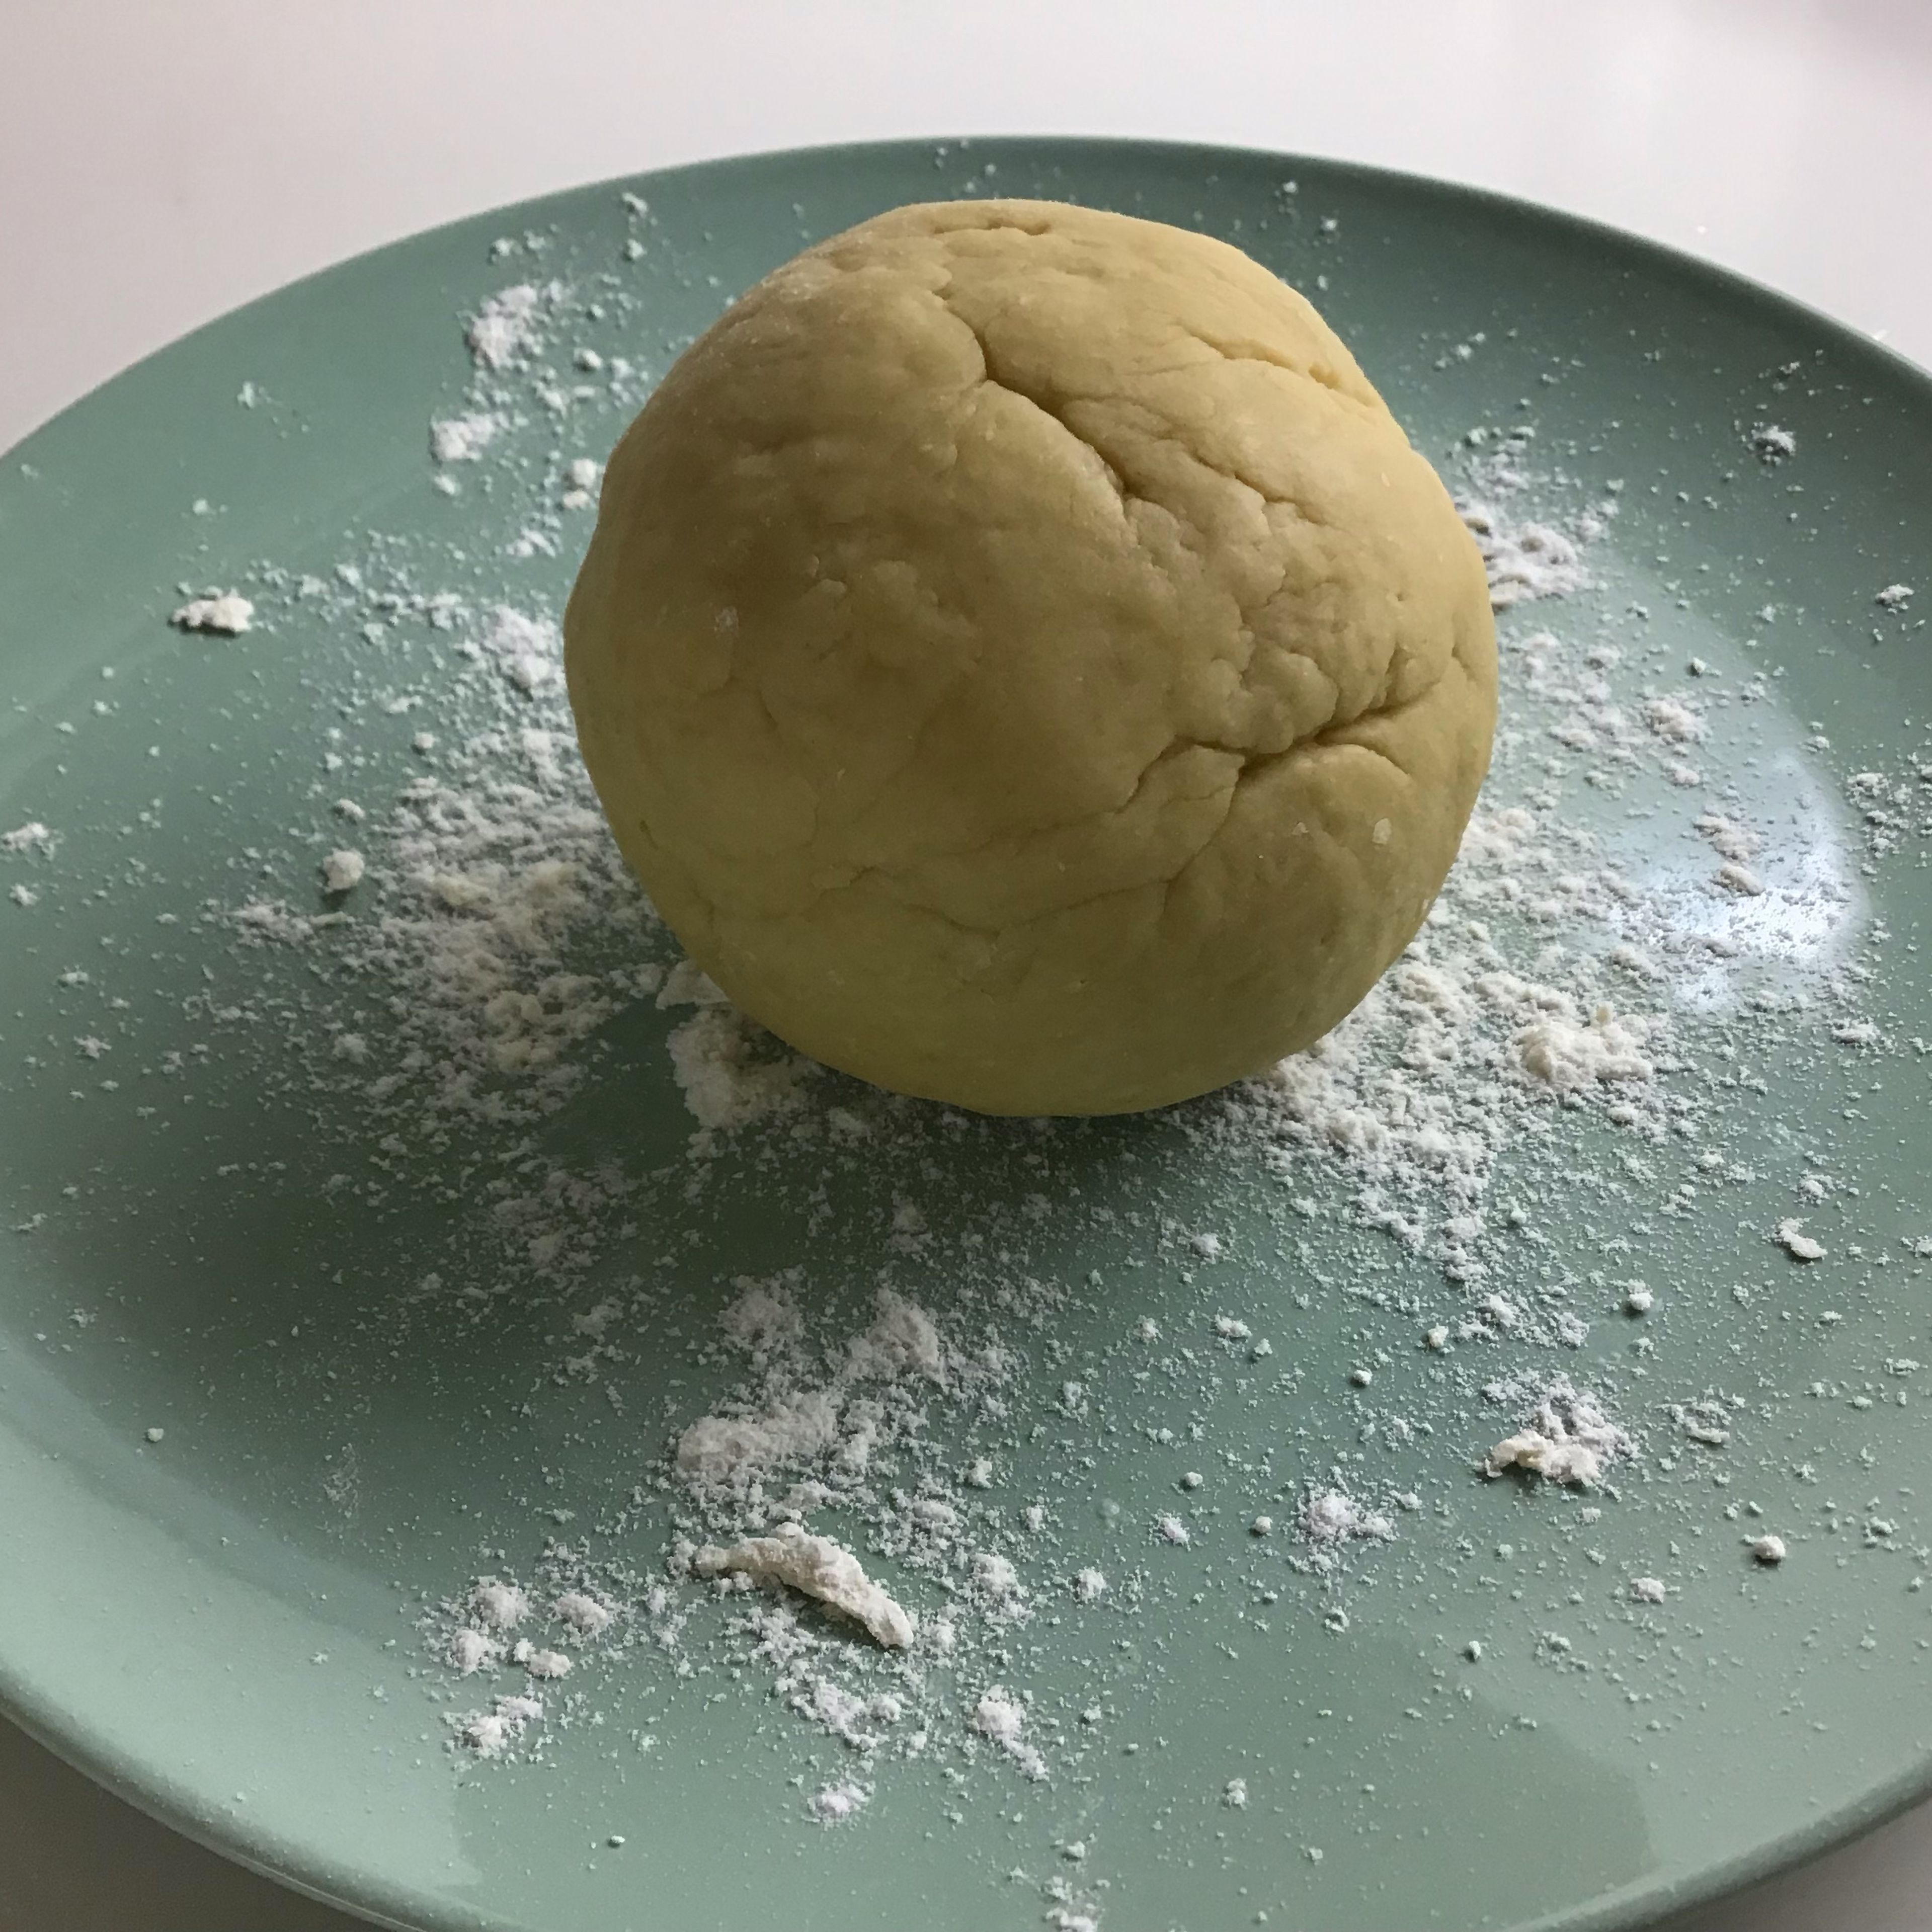 Slowly add 2 cups (1400ml) of flour and mix it with previous step. Then take it out of the bowl and mix(knead). You will need to have a smooth ball.